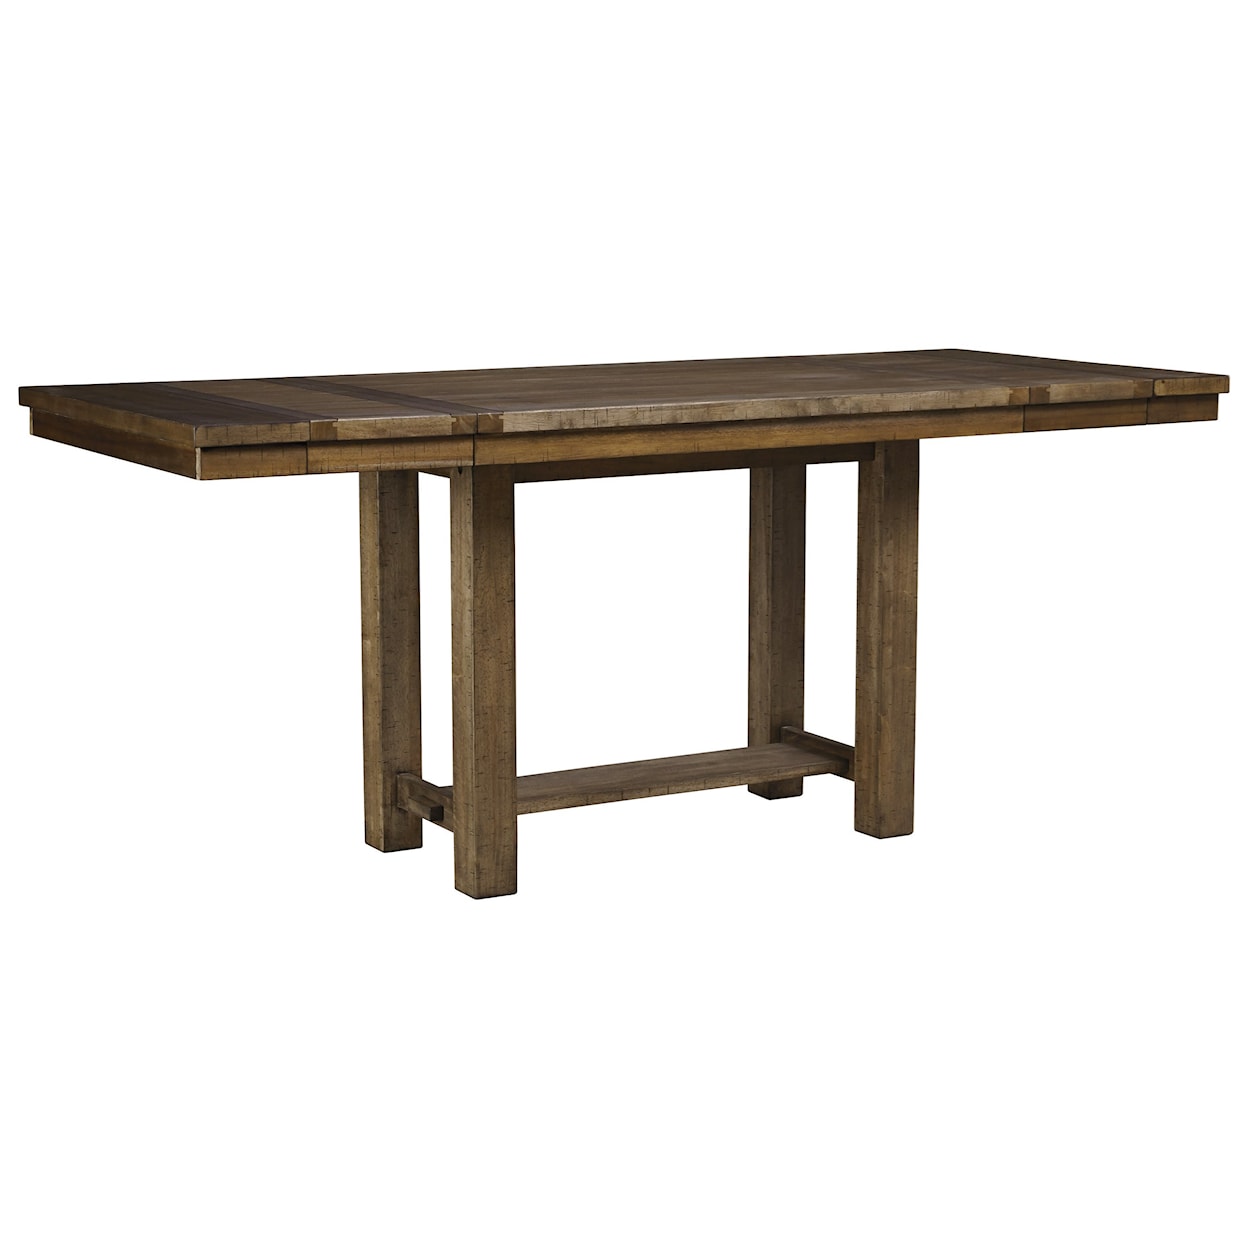 Signature Moriville Rect. Dining Room Counter Extension Table